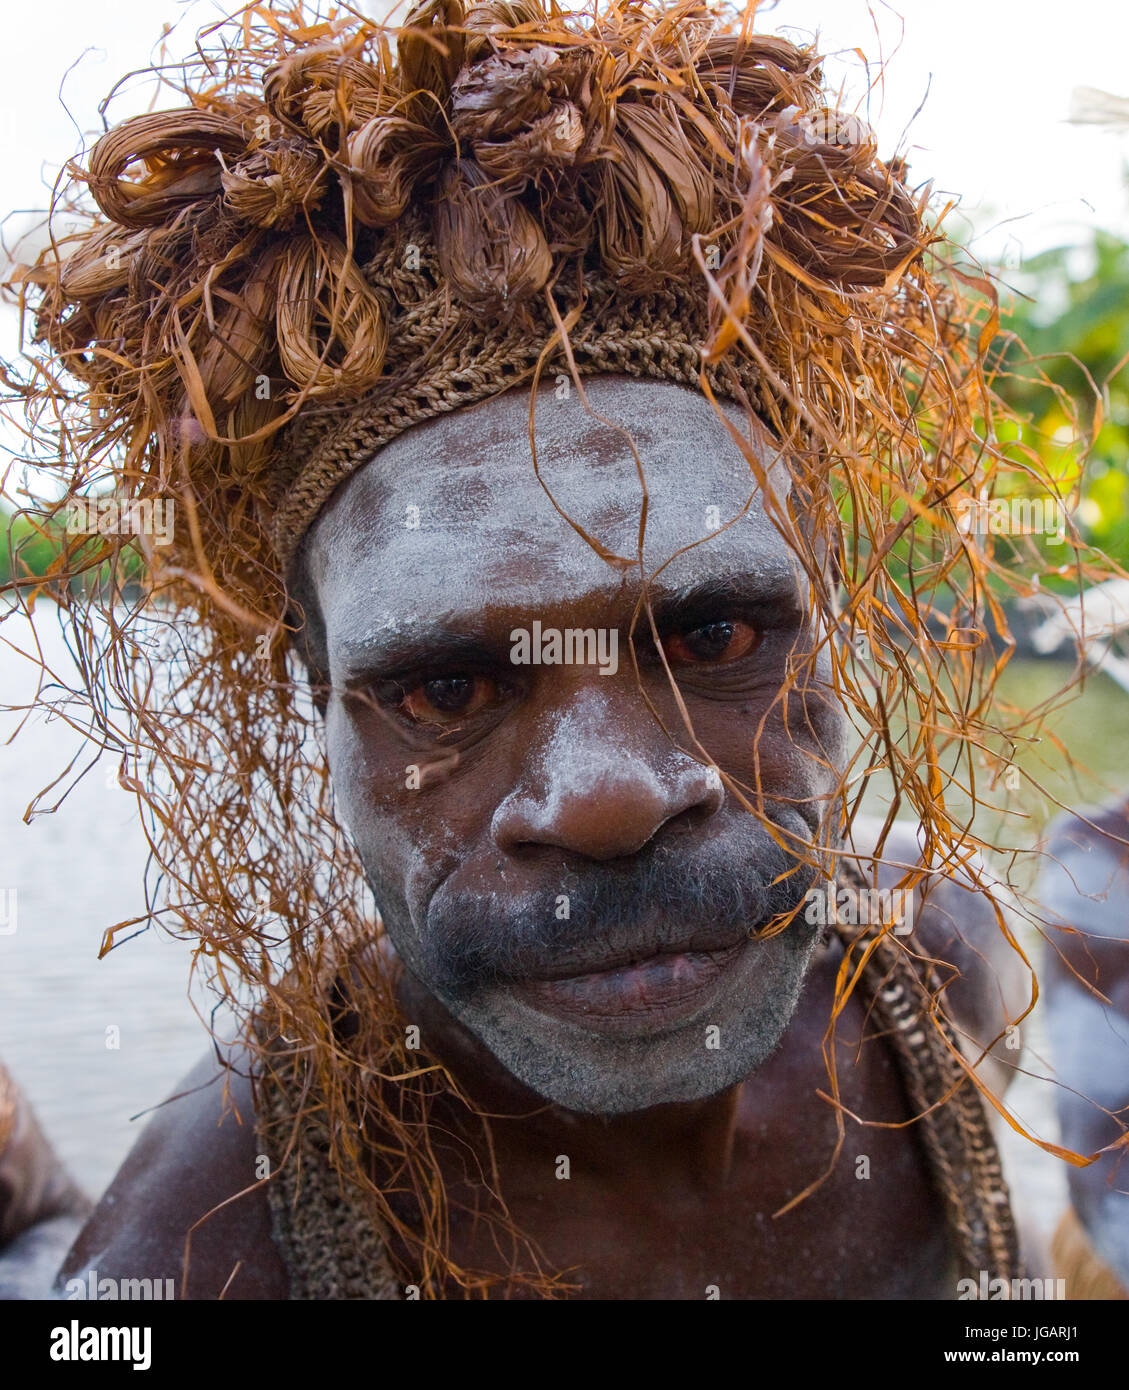 INDONESIA, IRIAN JAYA, ASMAT PROVINCE, JOW VILLAGE - JANUARY 19: The Portrait Asmat warrior with a traditional painting and coloring on a face. Stock Photo